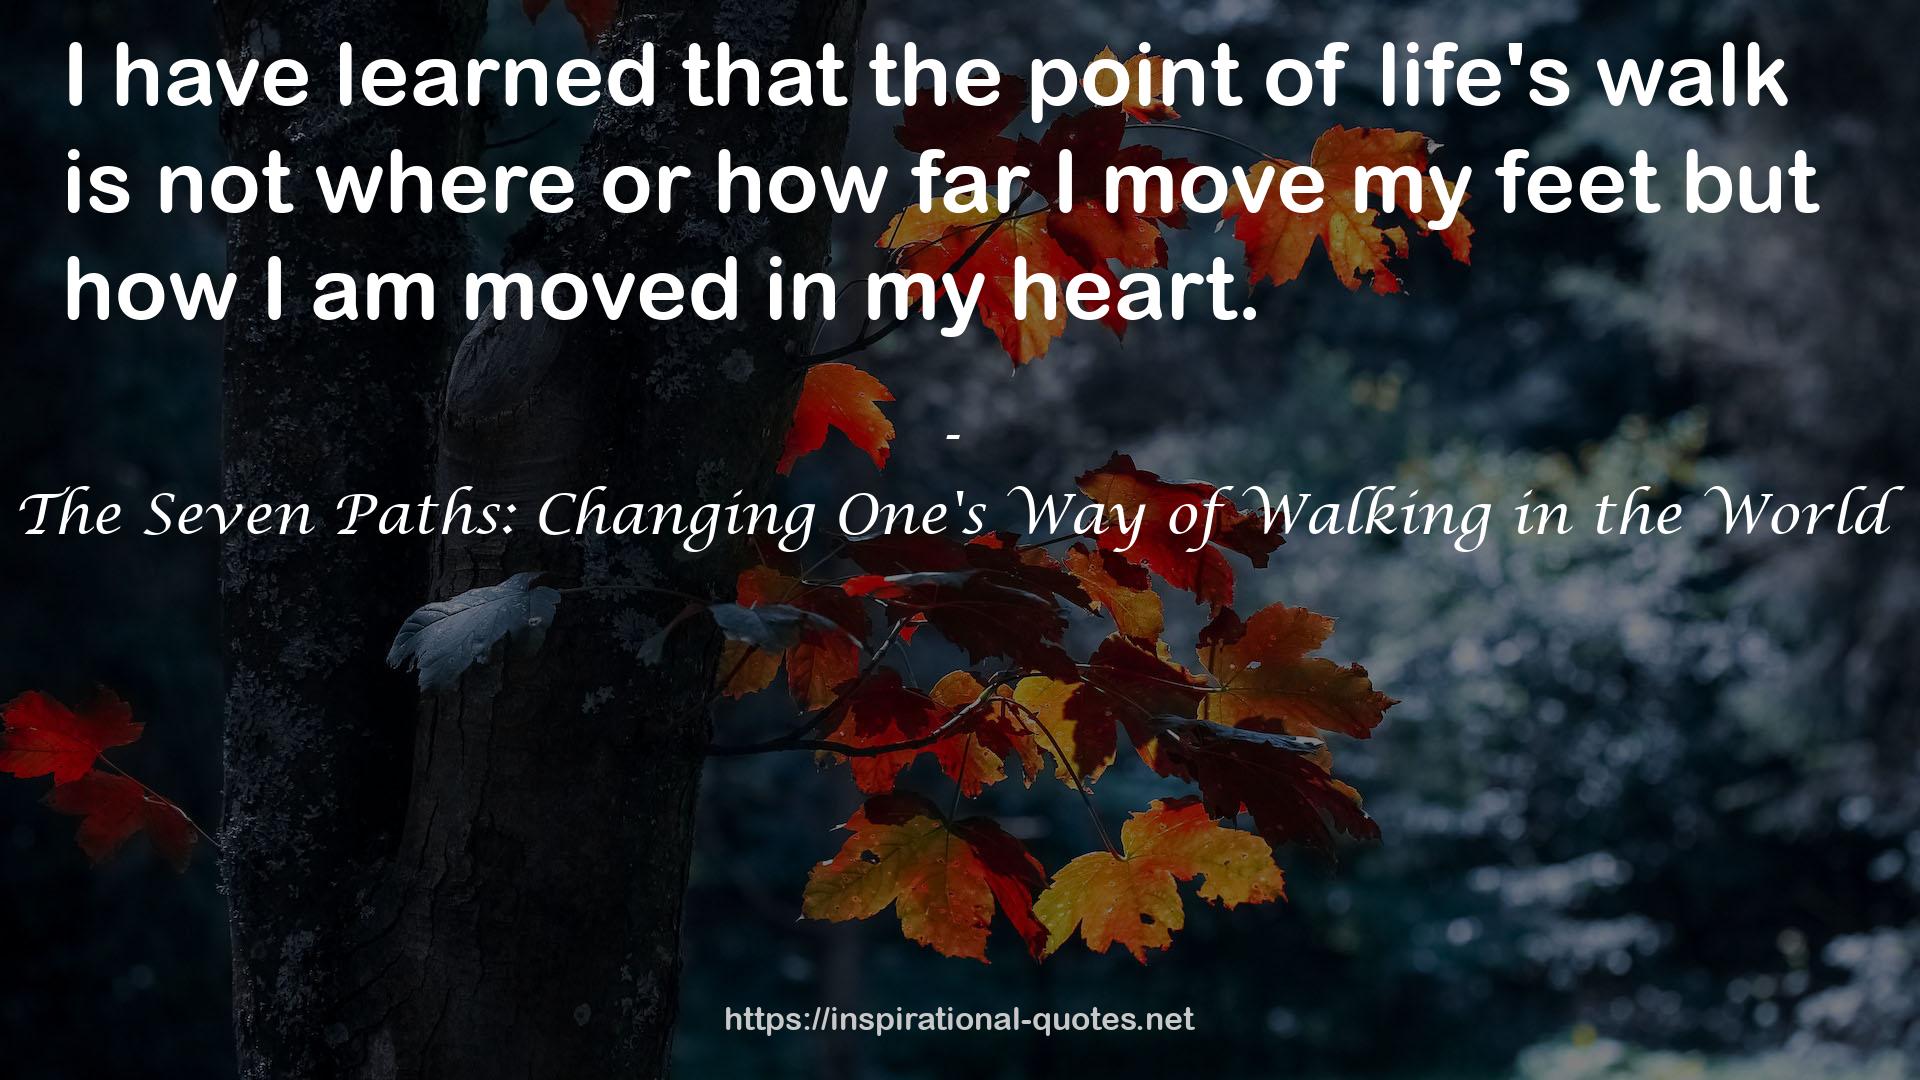 The Seven Paths: Changing One's Way of Walking in the World QUOTES